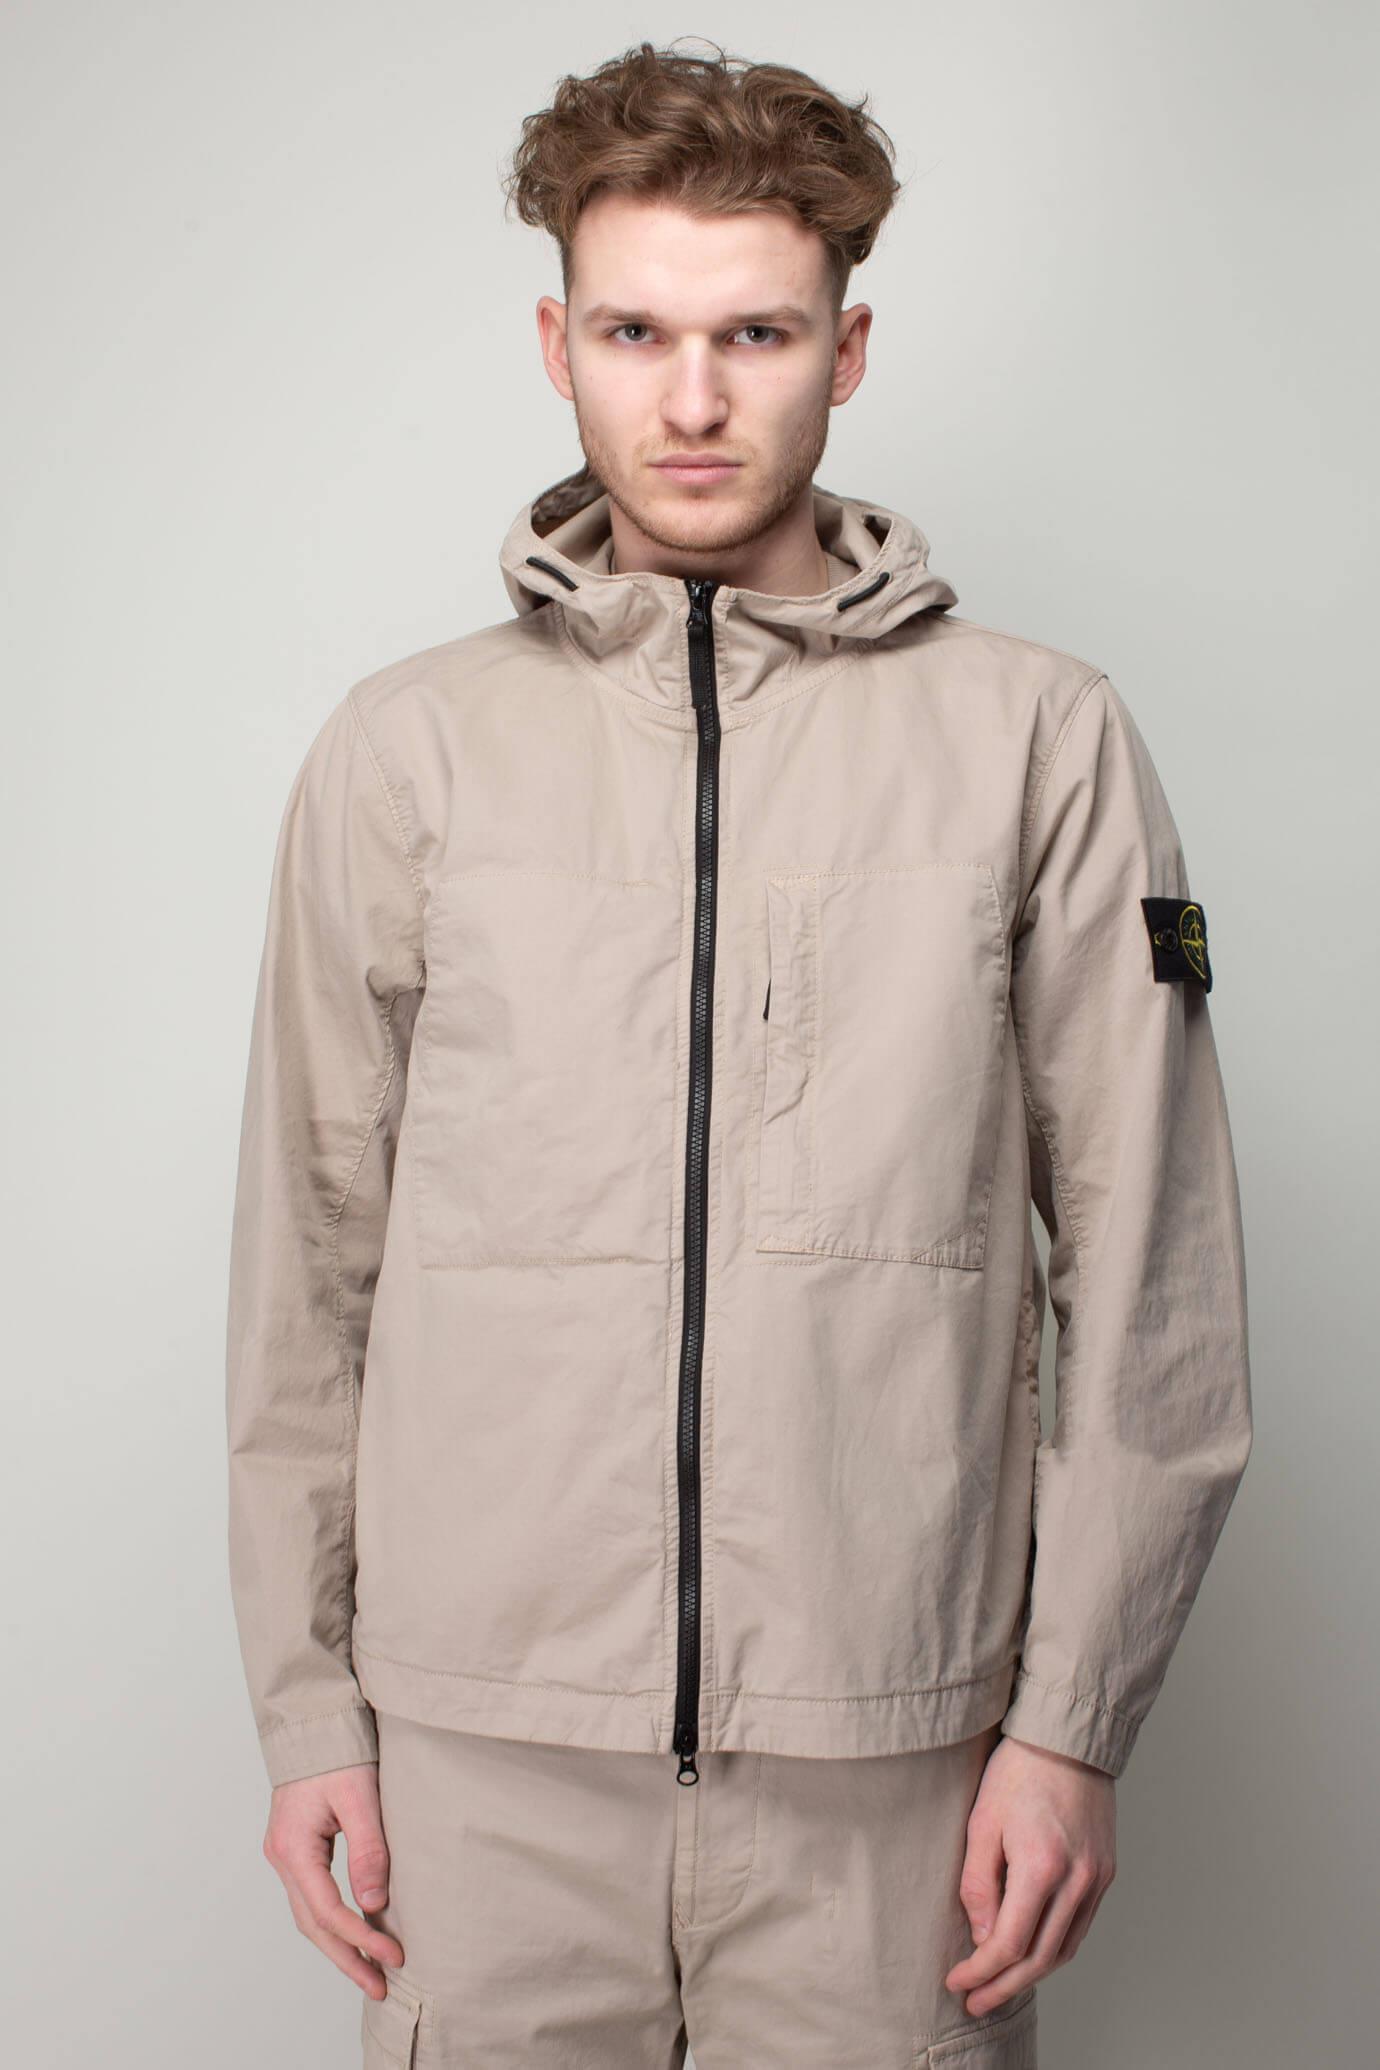 Stone Island Supima Cotton Twill Stretch-tc Jacket in Natural for Men ...